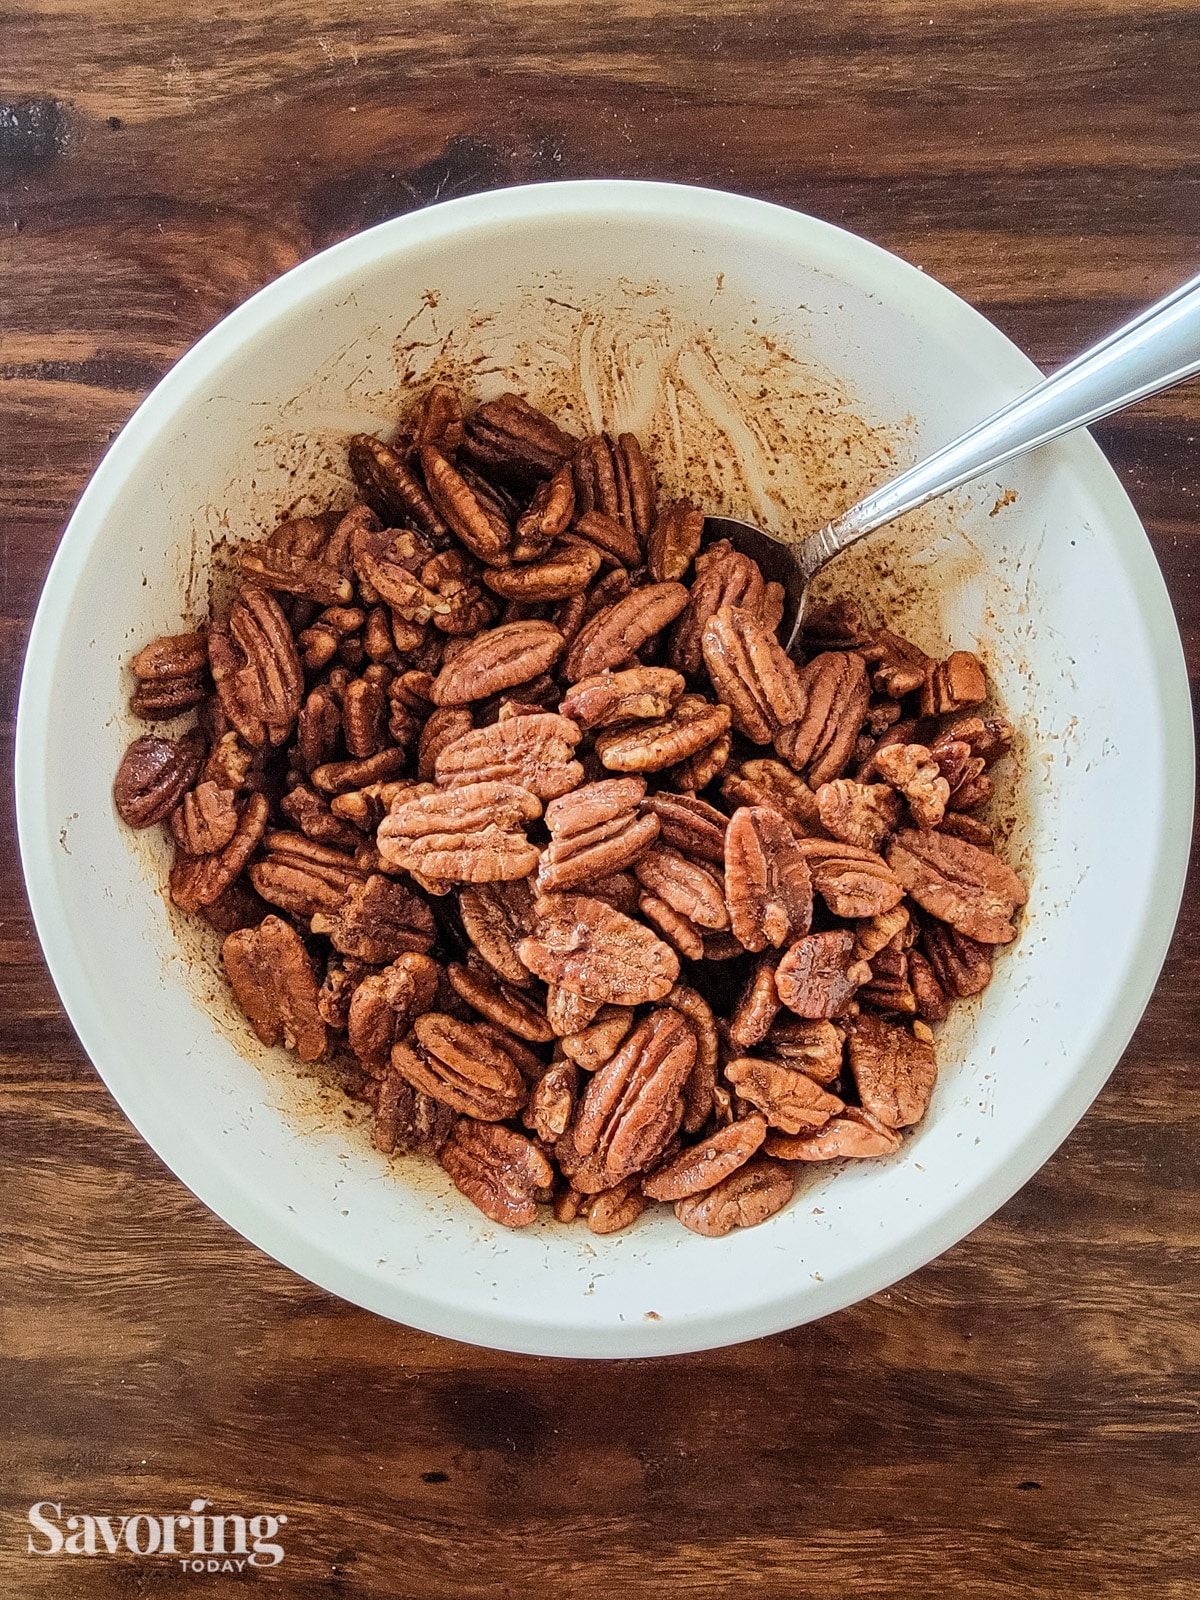 Mixing pecans with cinnamon, sugar, and chipotle